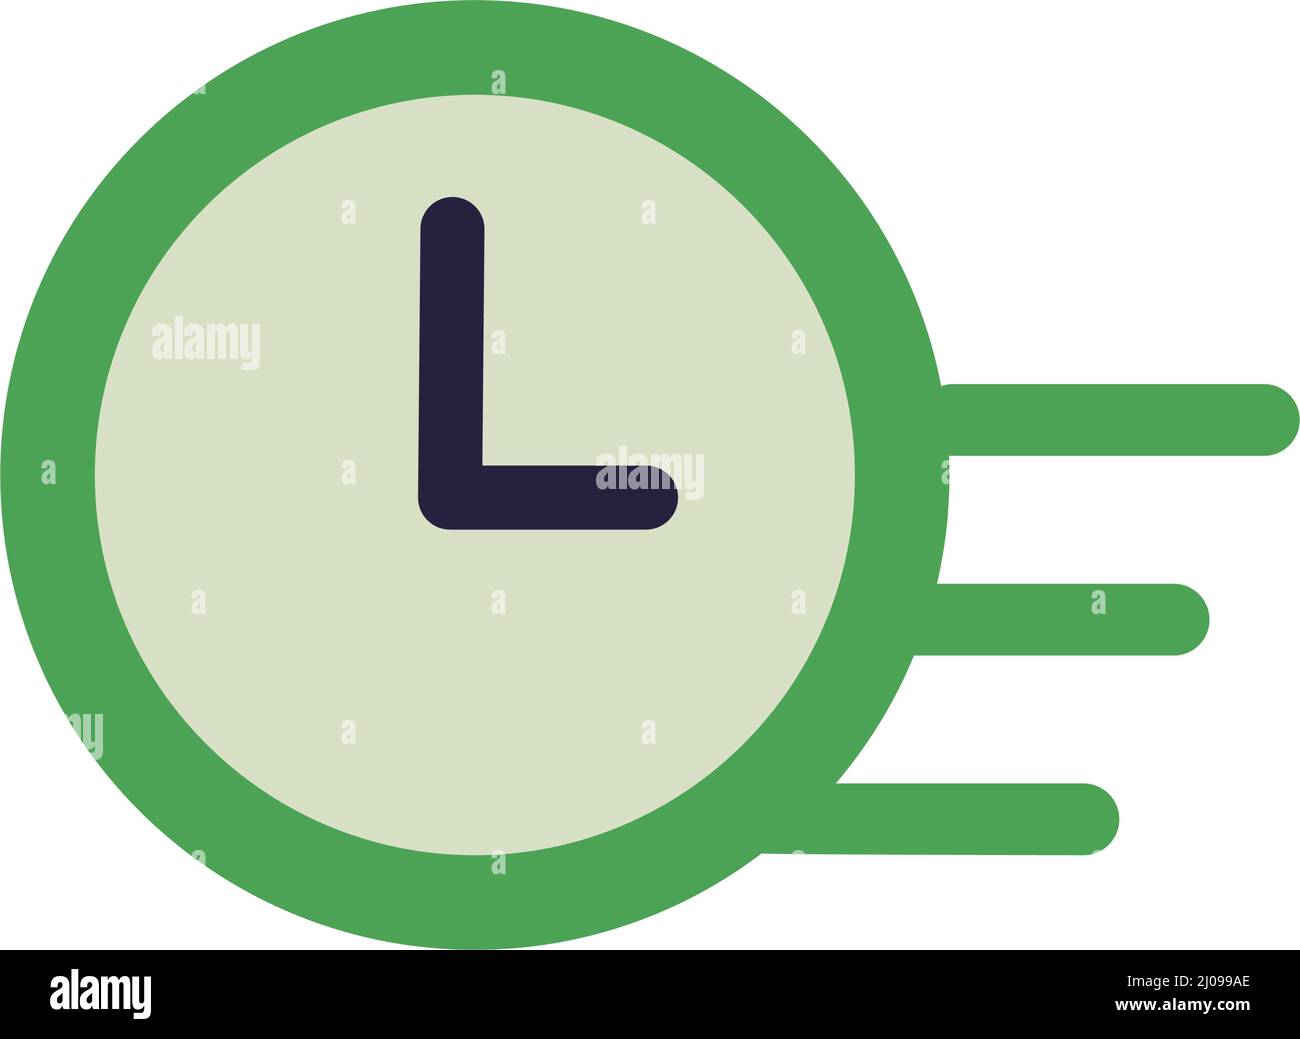 Time is moving forward. A moving clock icon. Editable vectors. Stock Vector